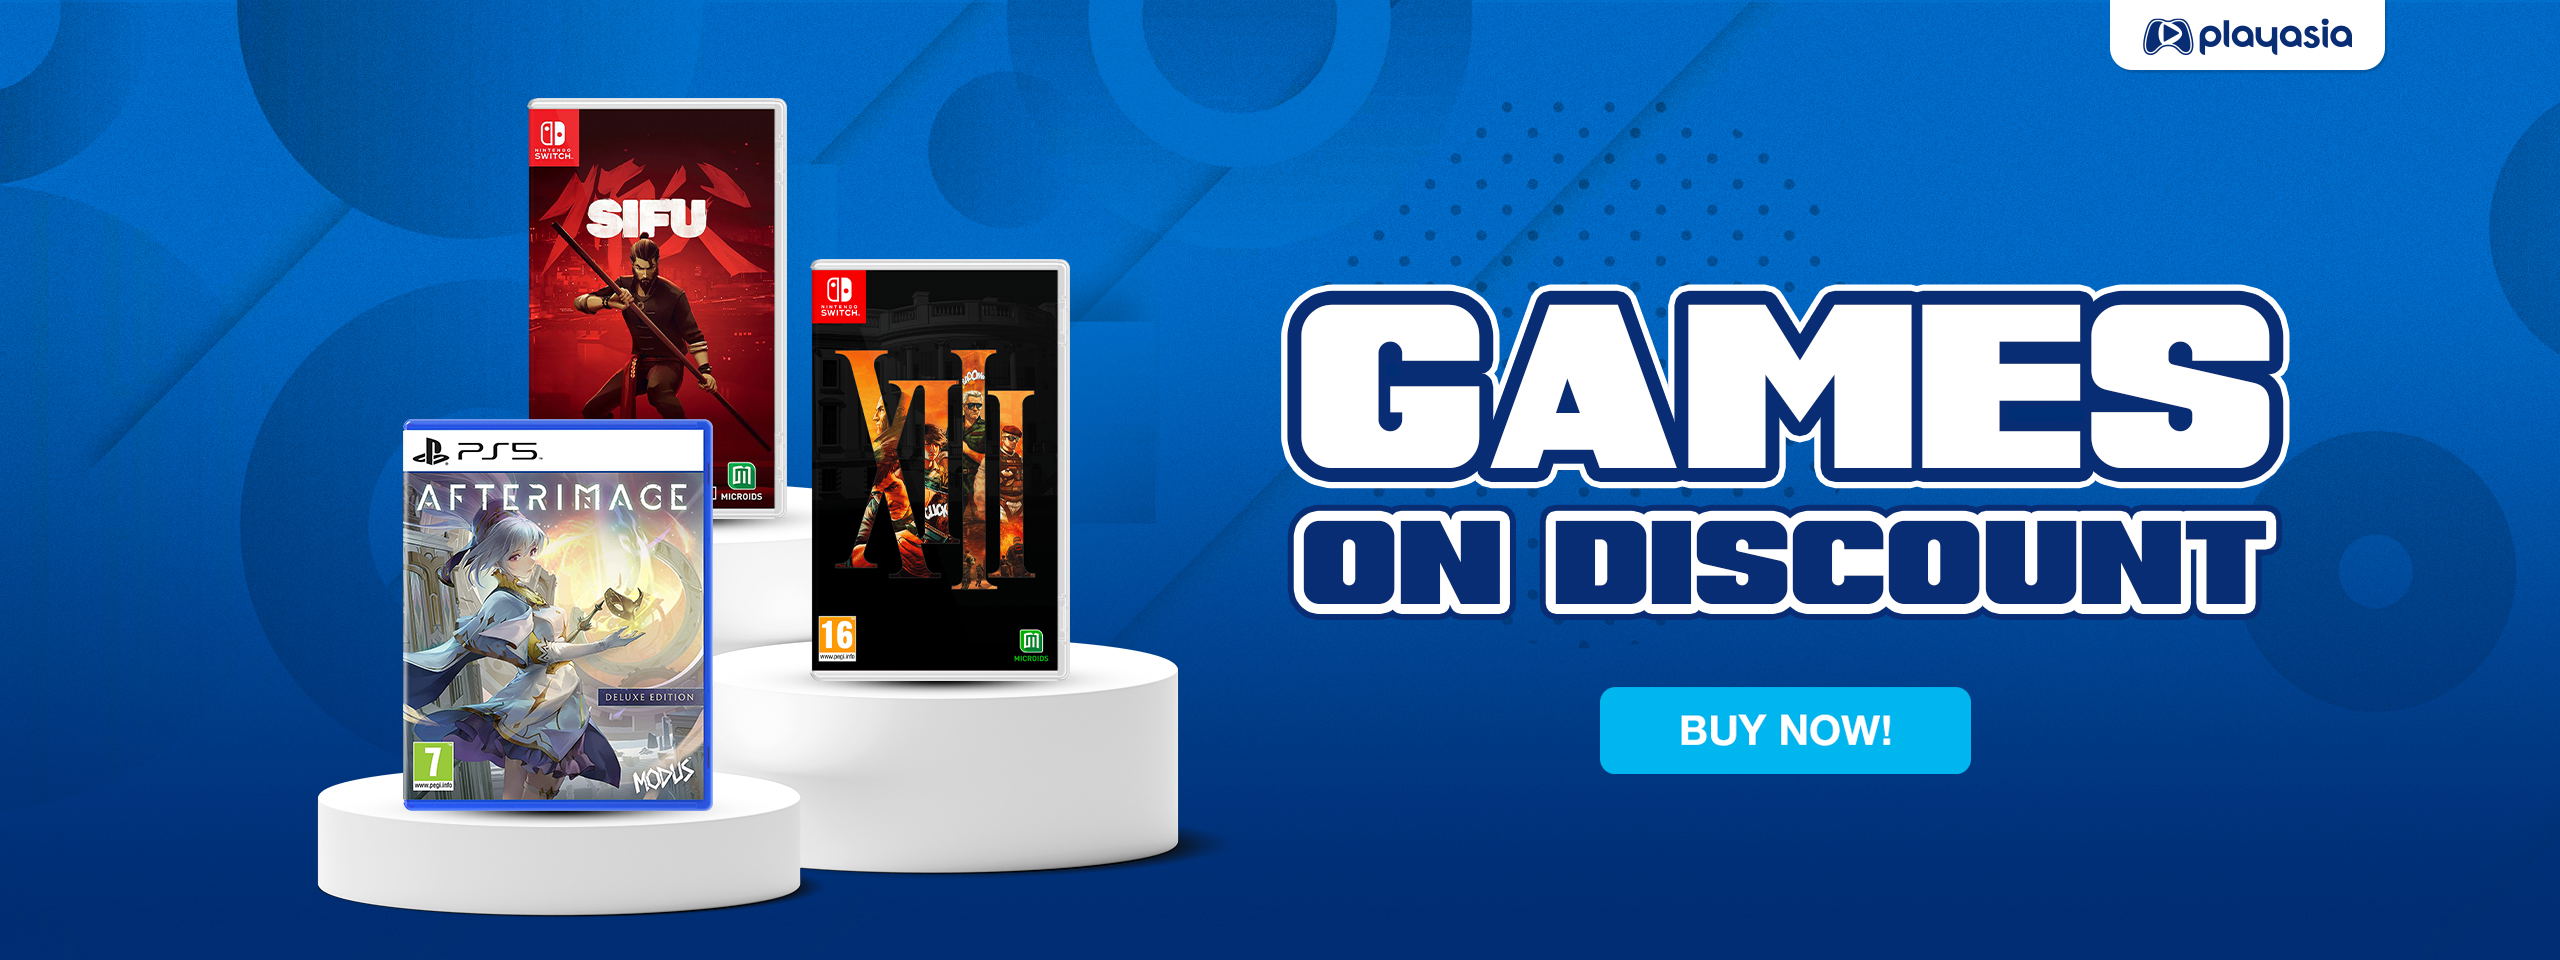 Playasia.com: Online Shopping for Digital Codes, Video Games, Toys 